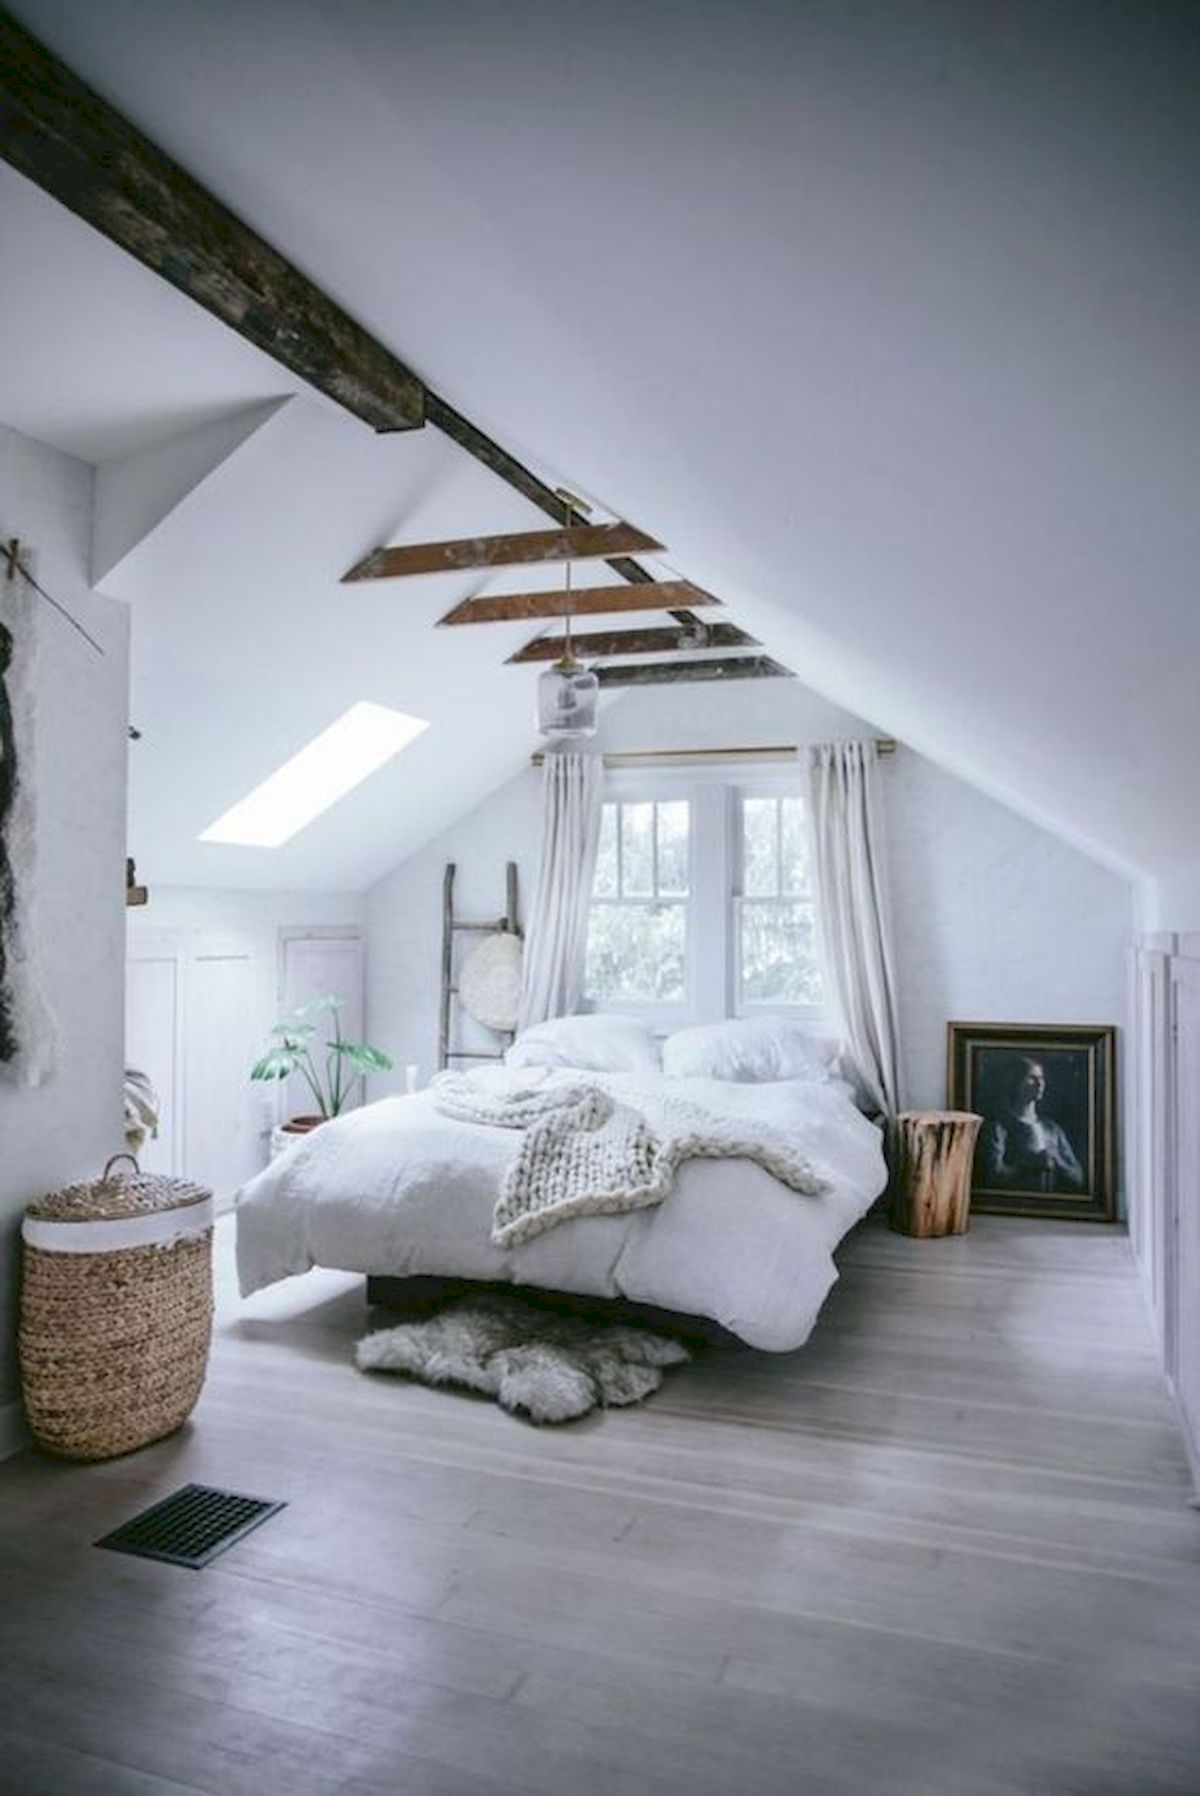 40 Awesome Attic Bedroom Design And Decorating Ideas (7)